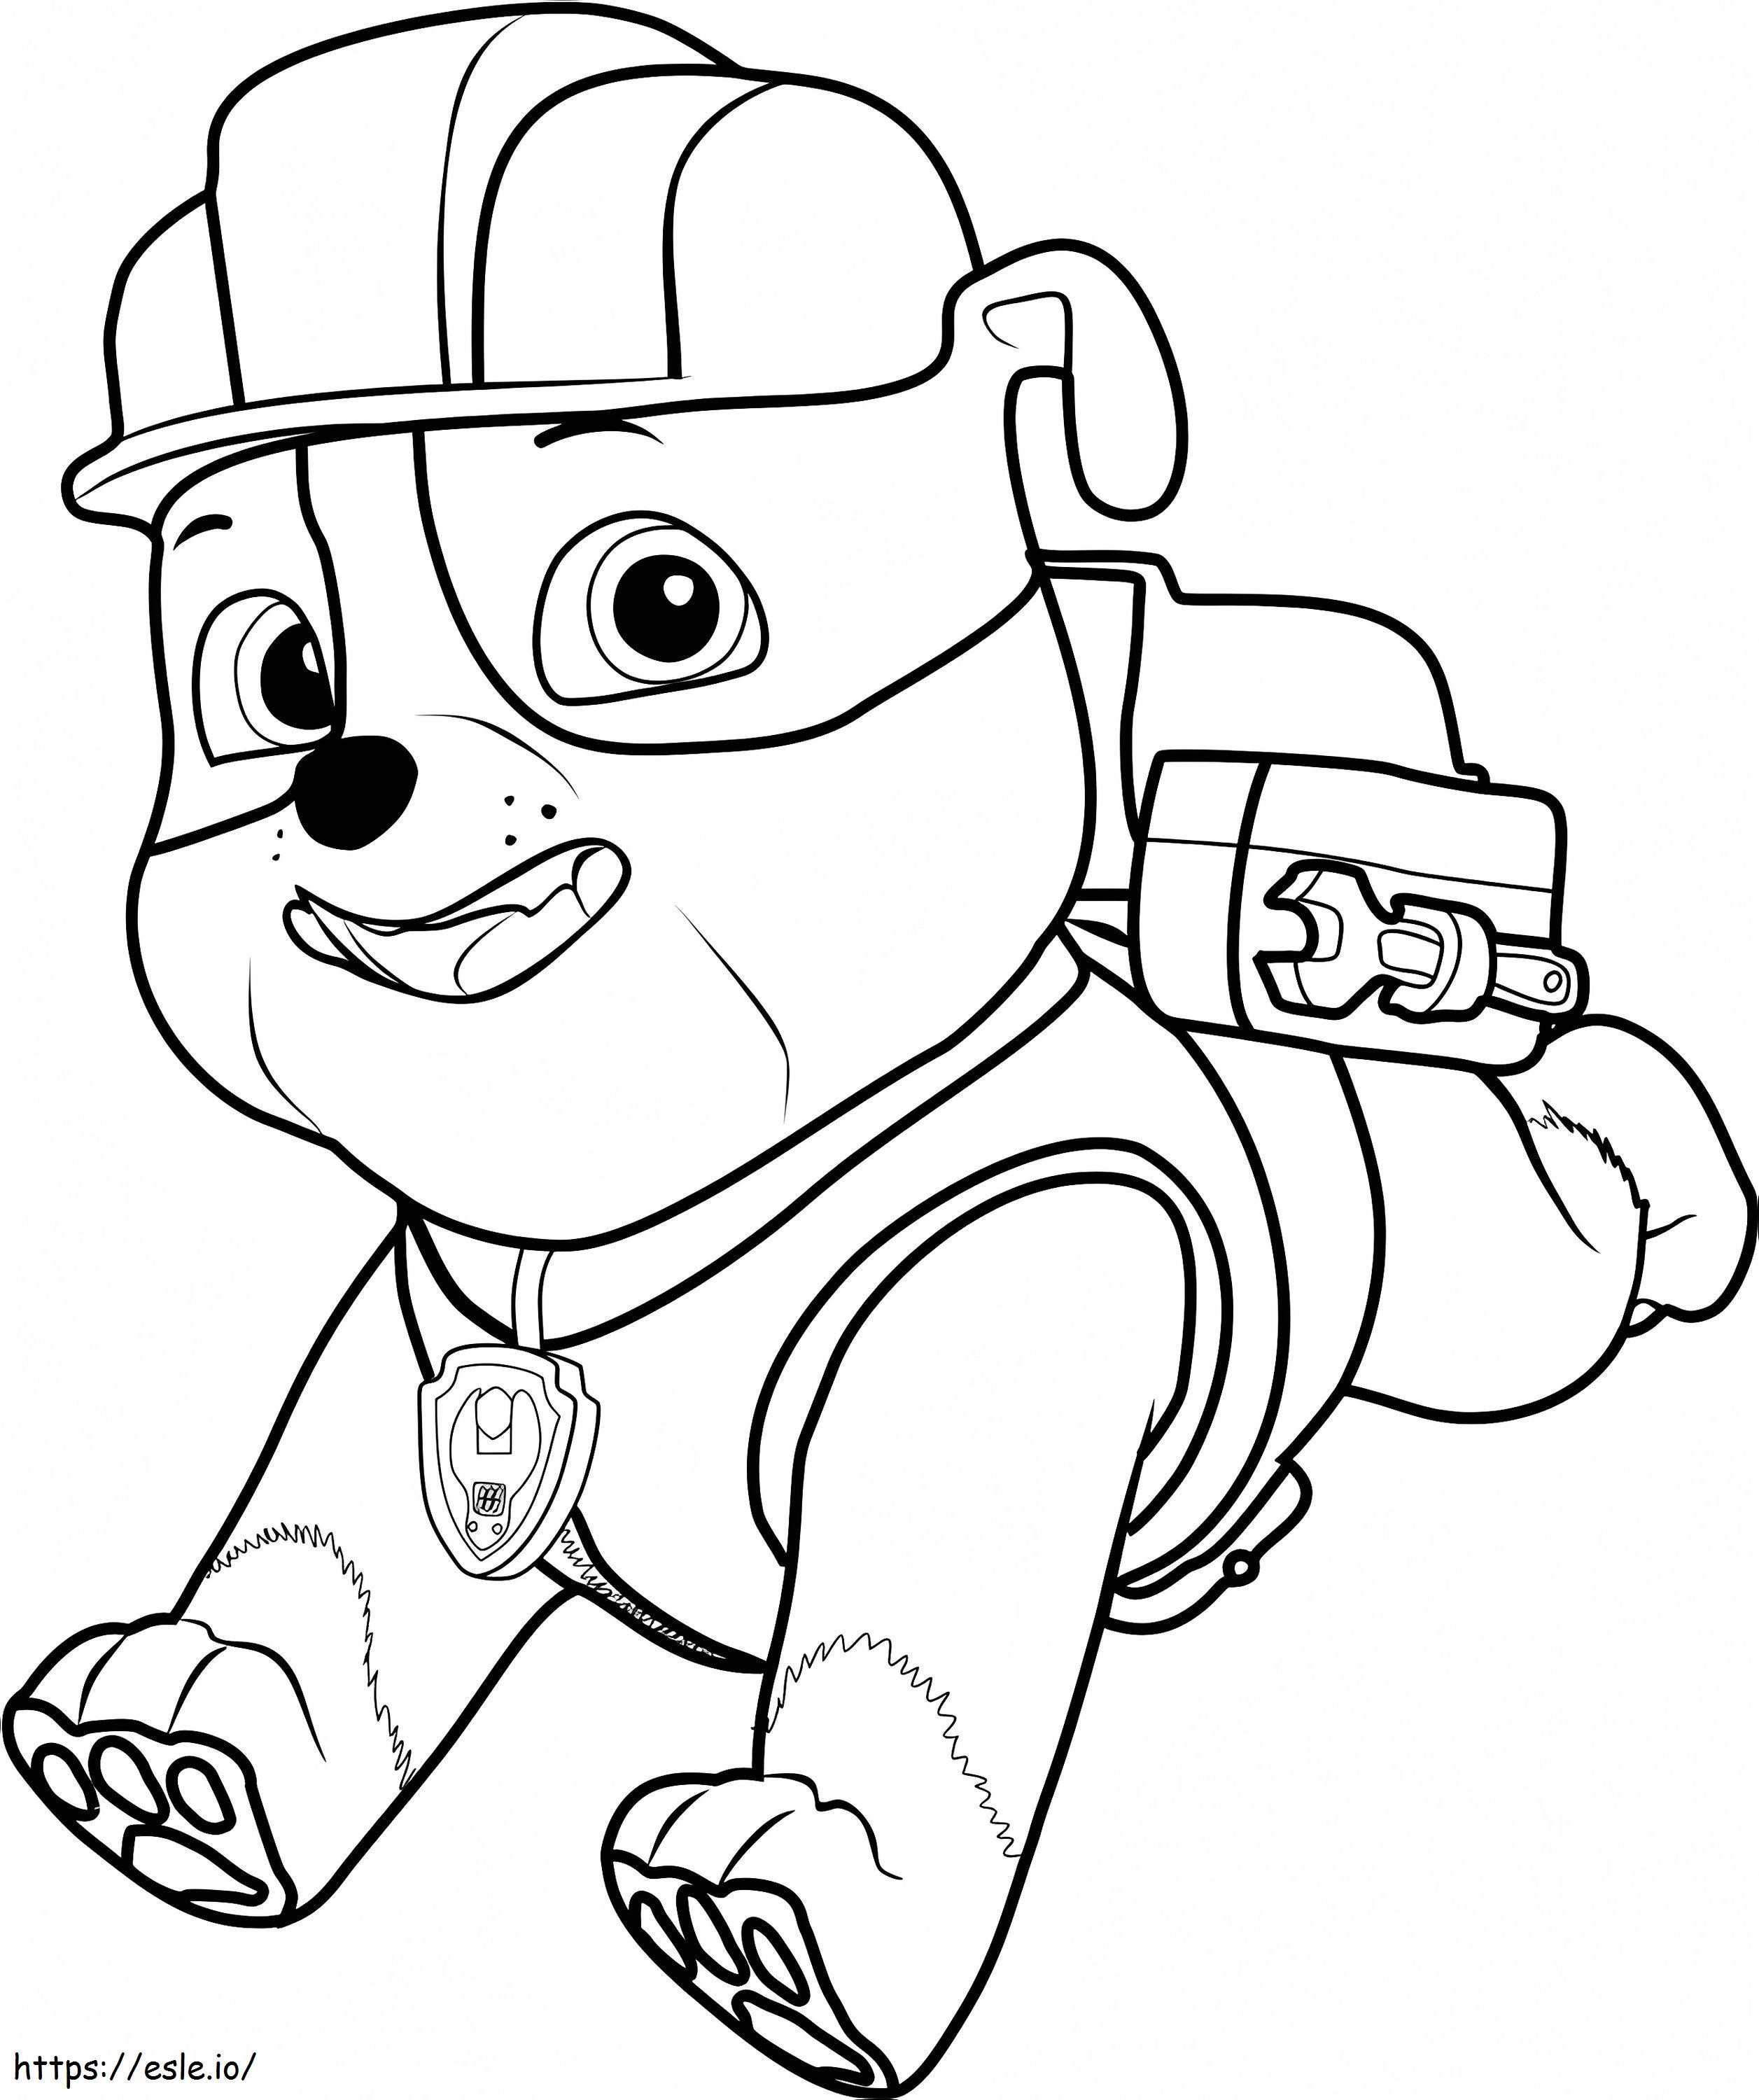 1529603309_36 coloring page